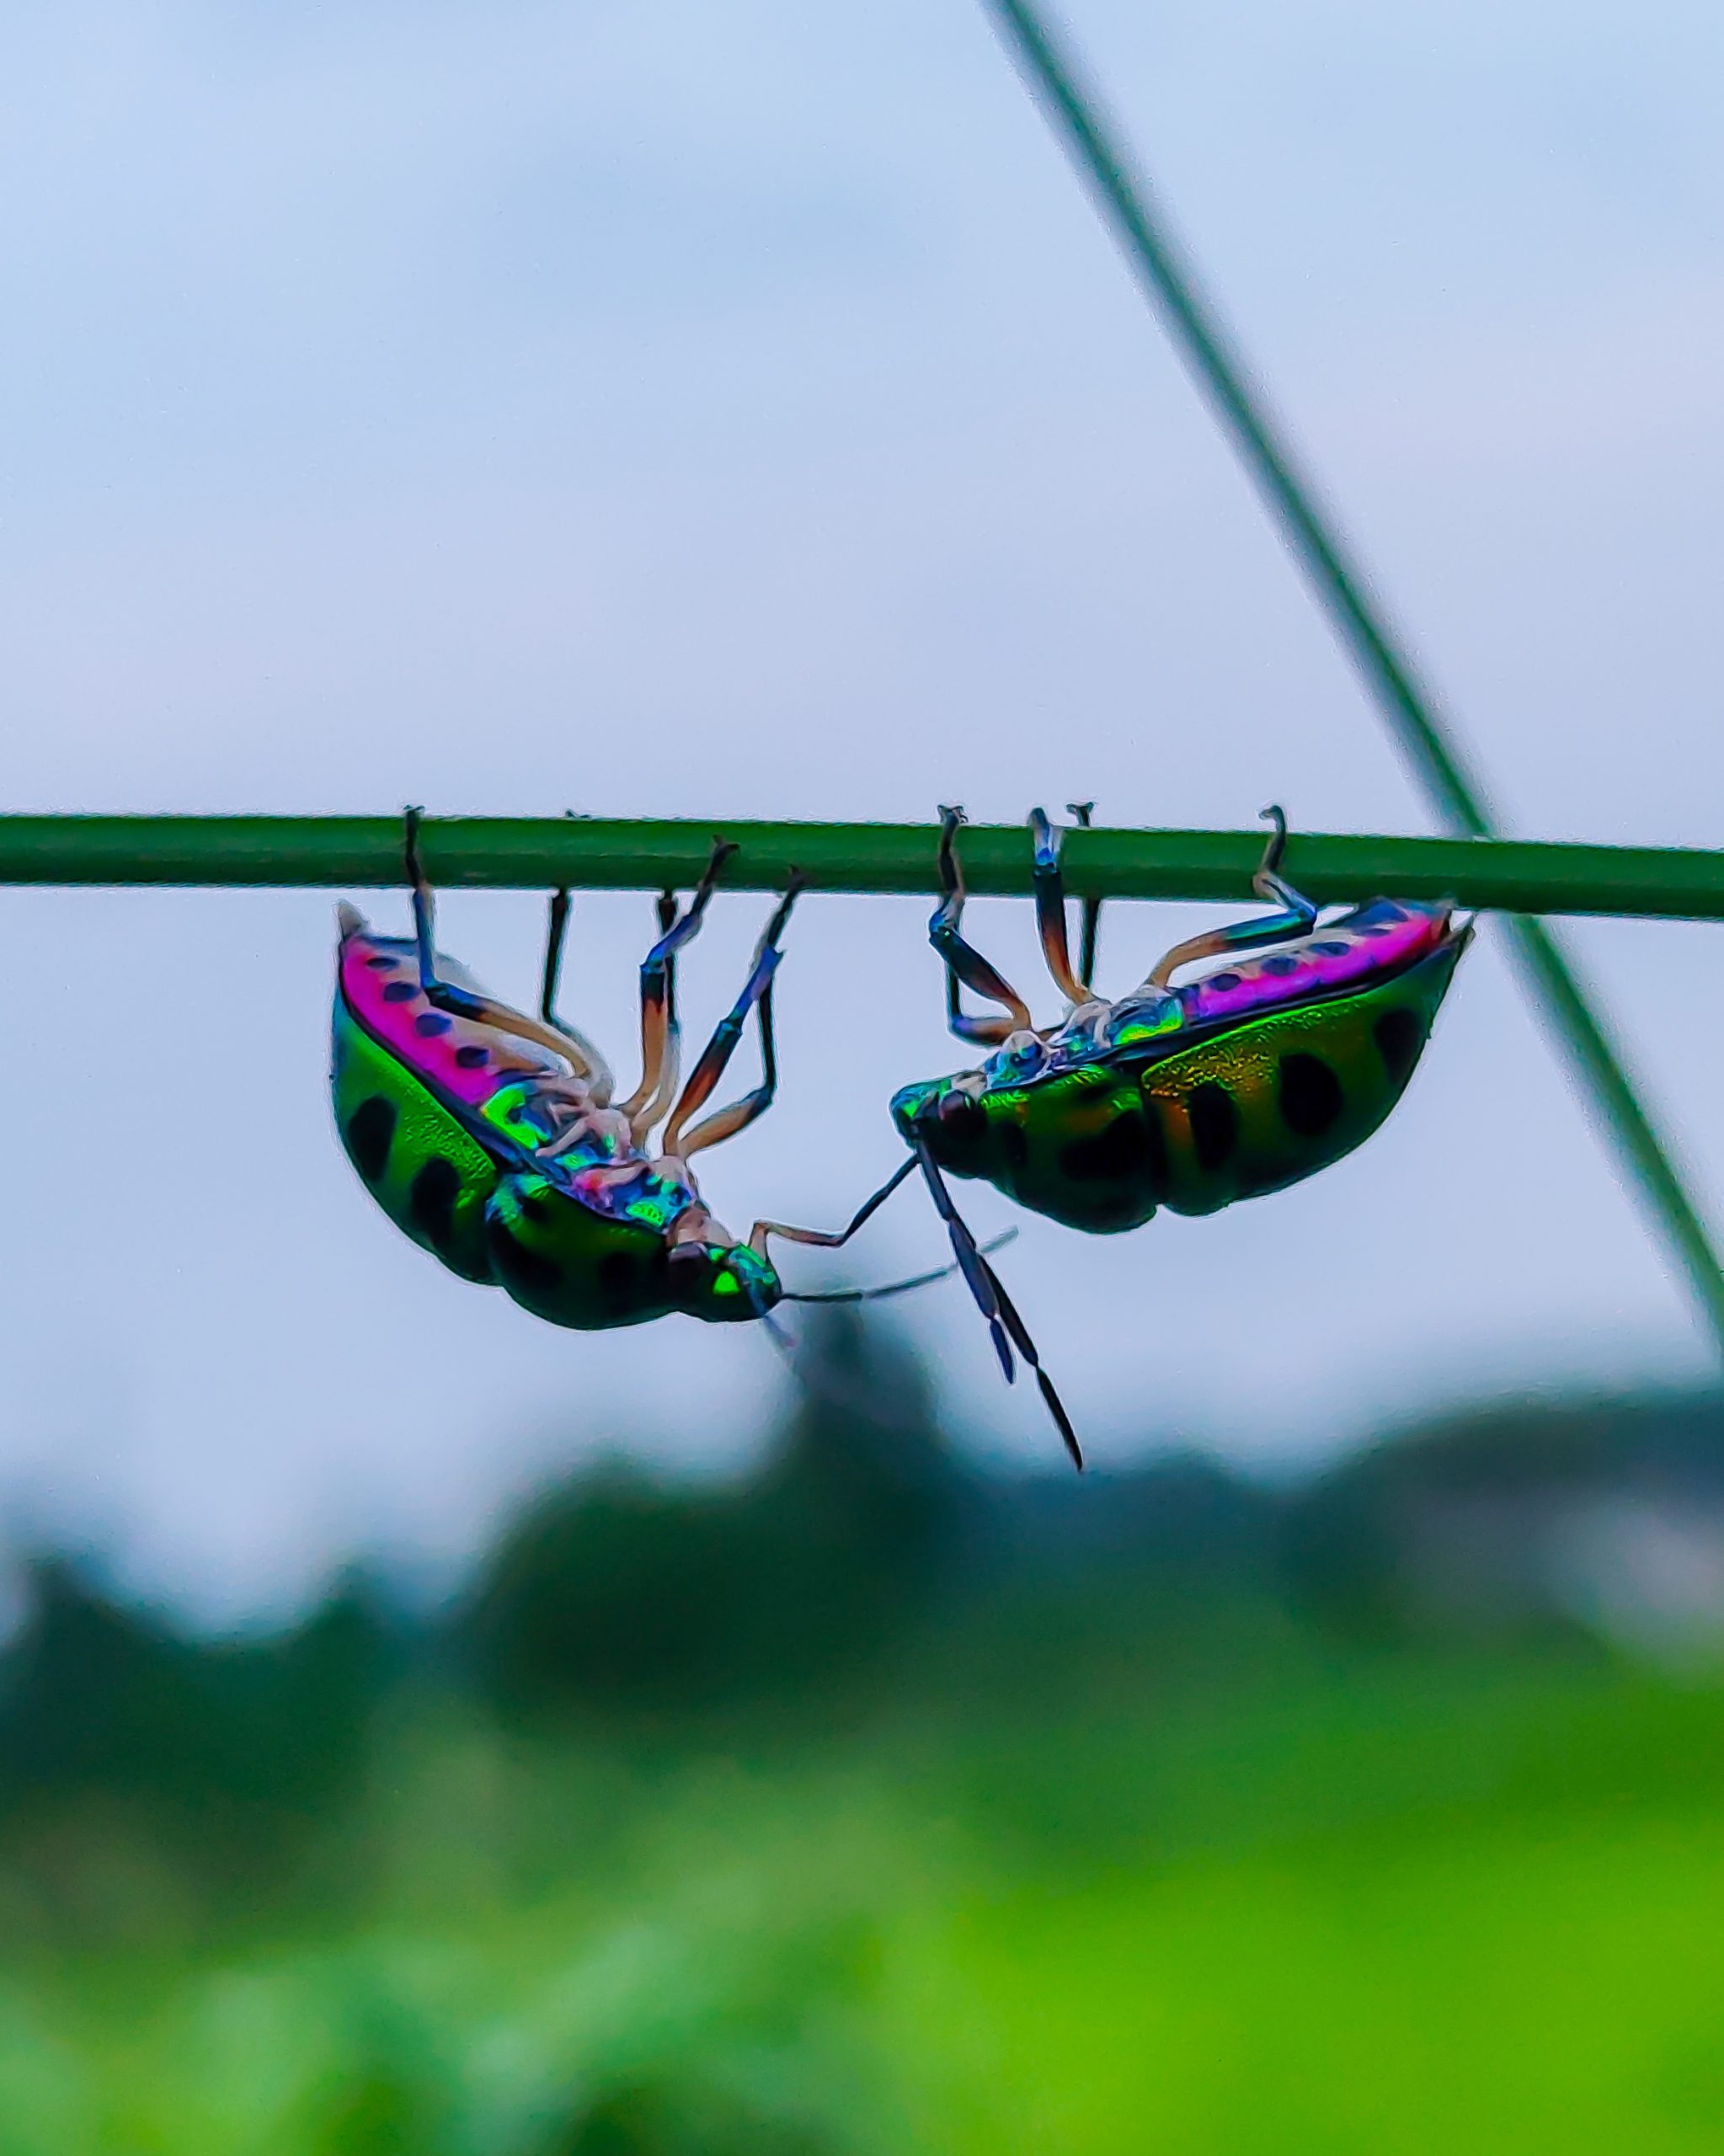 Two colorful beetle on a branch